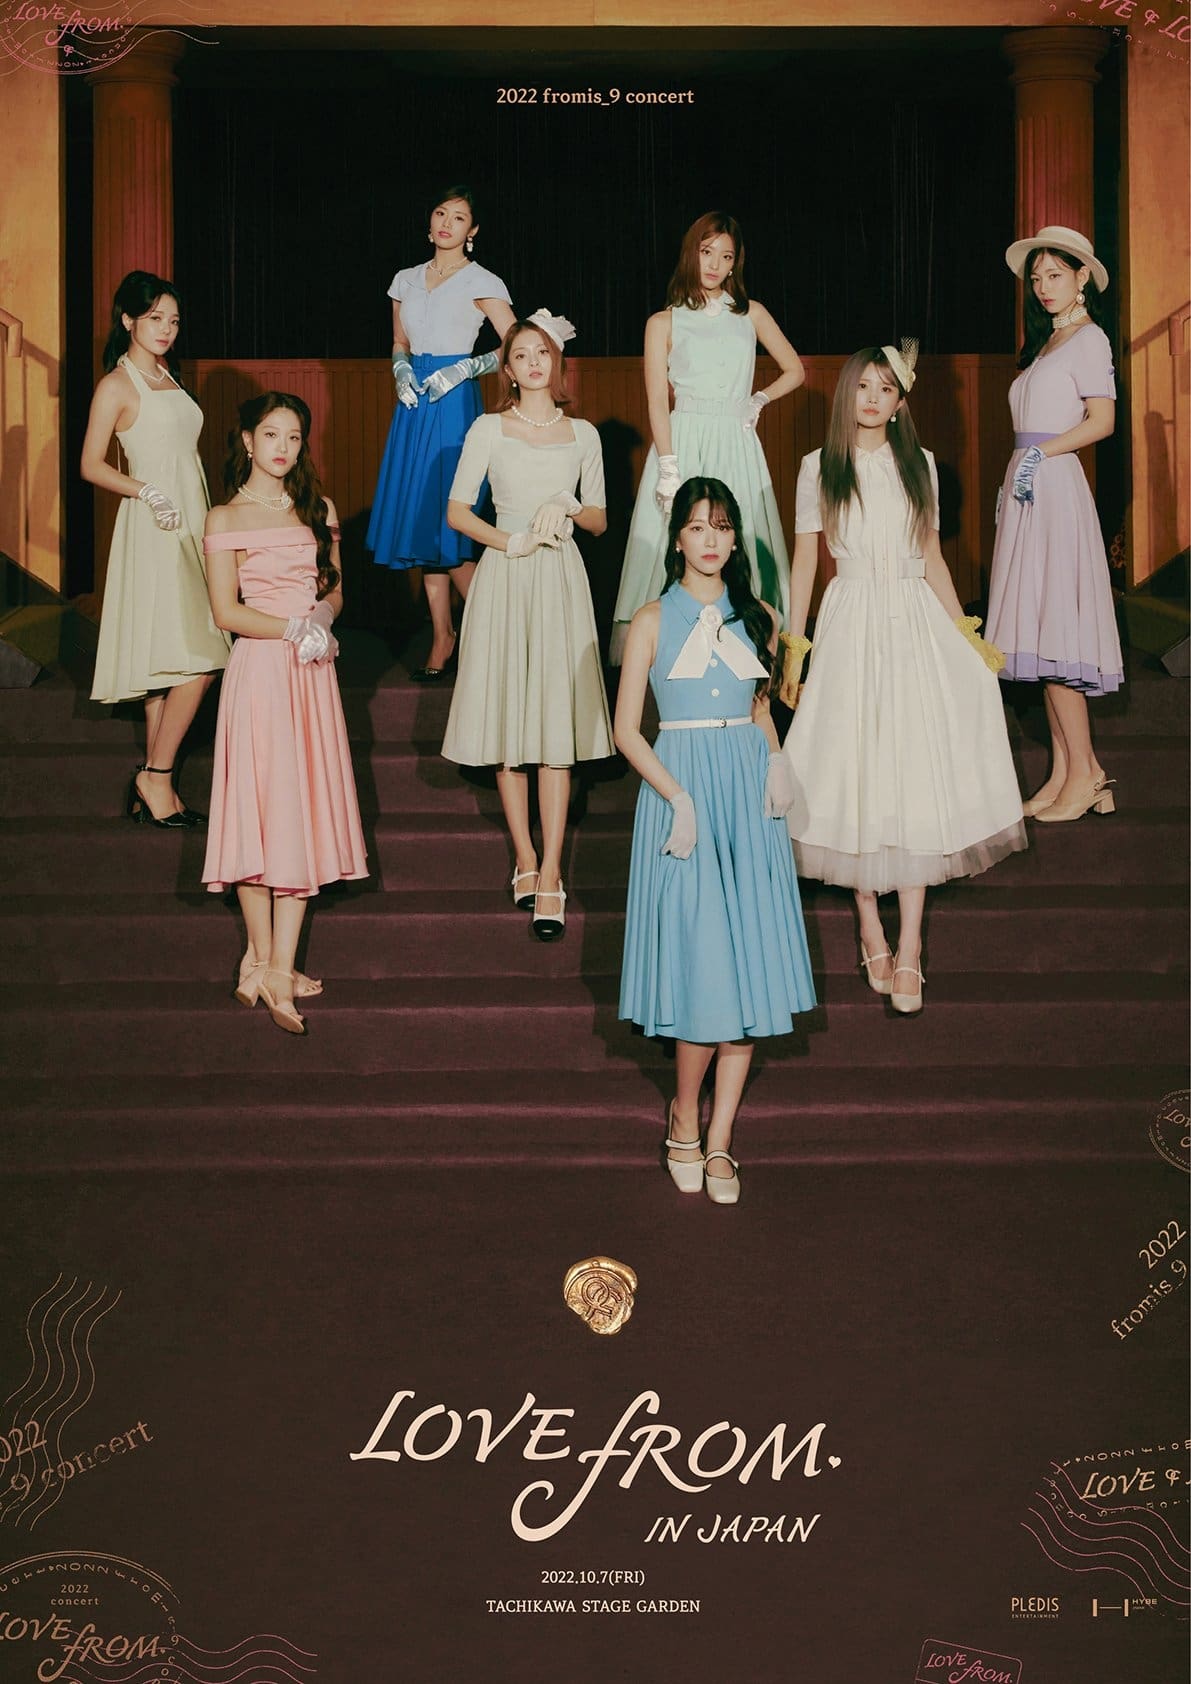 fromis_9 concert ＜LOVE FROM.＞ IN JAPAN